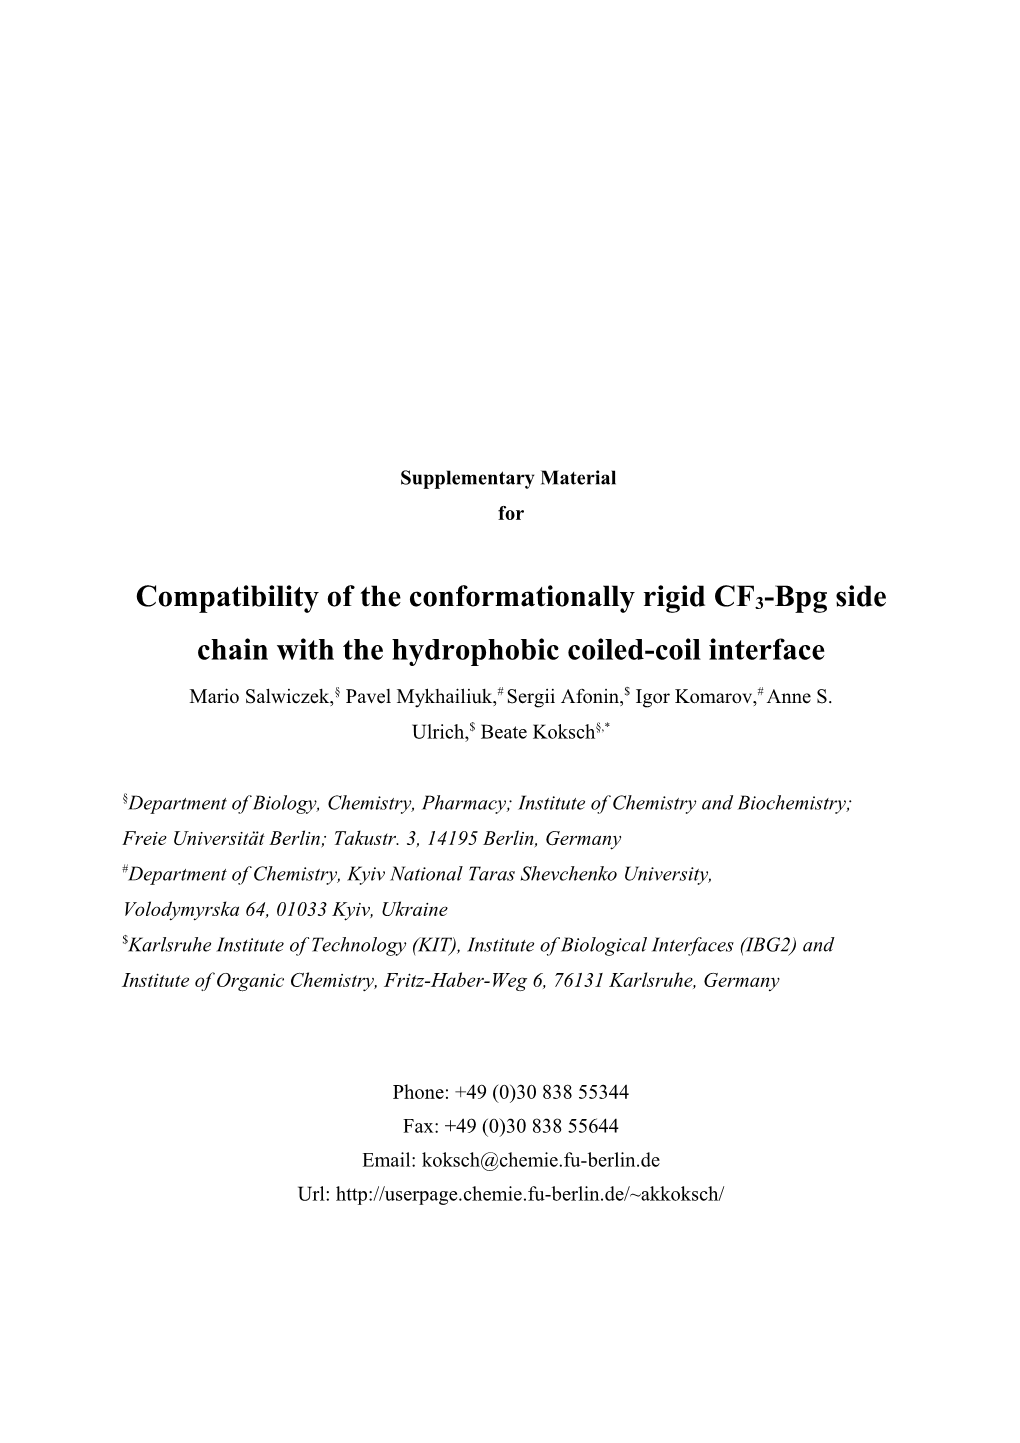 Compatibility of the Conformationally Rigid Cf3bpg Side Chain with the Hydrophobic Coiledcoil